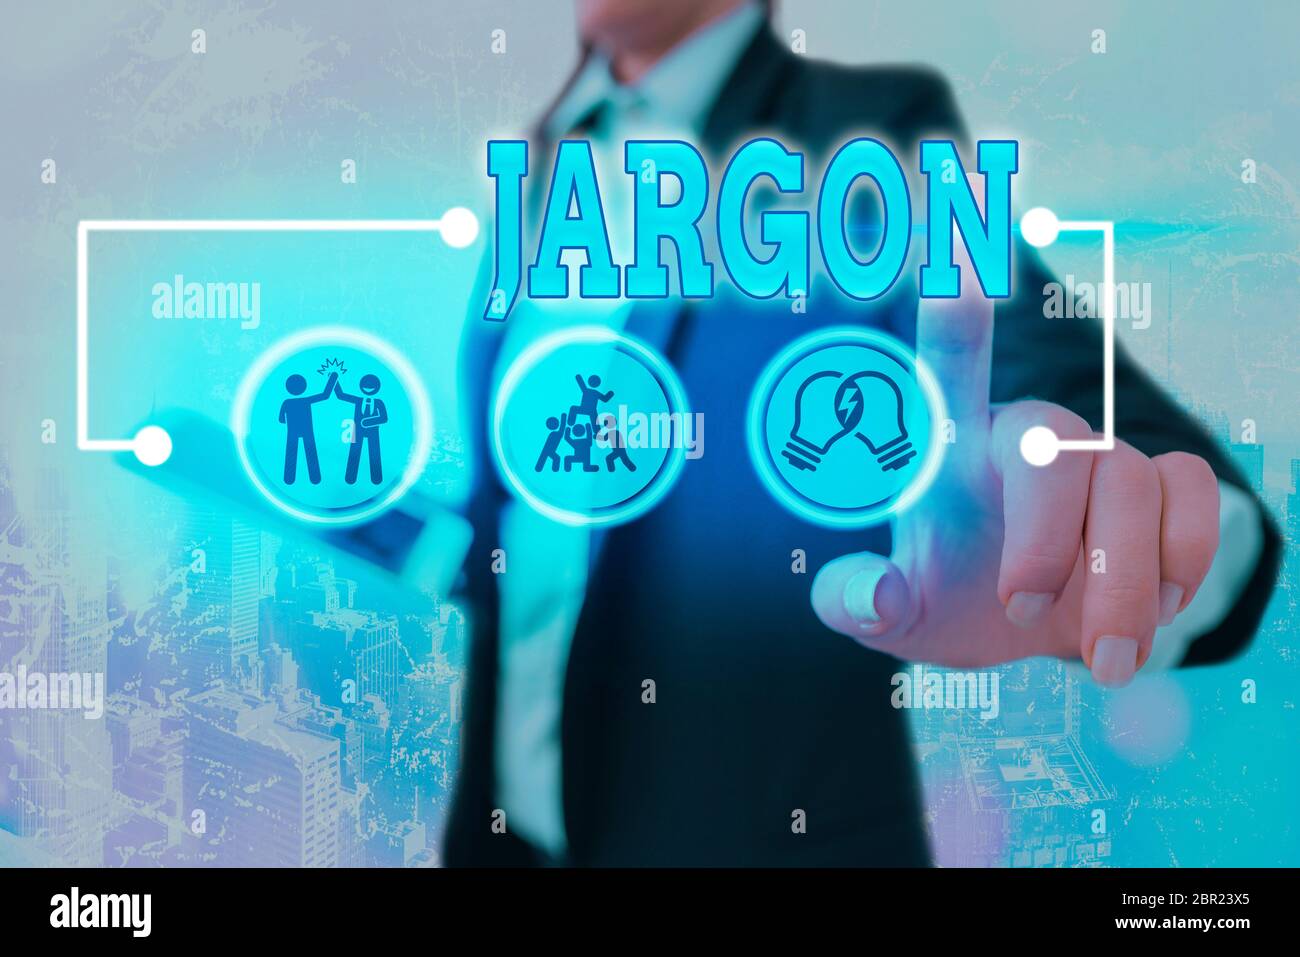 Jargon meaning